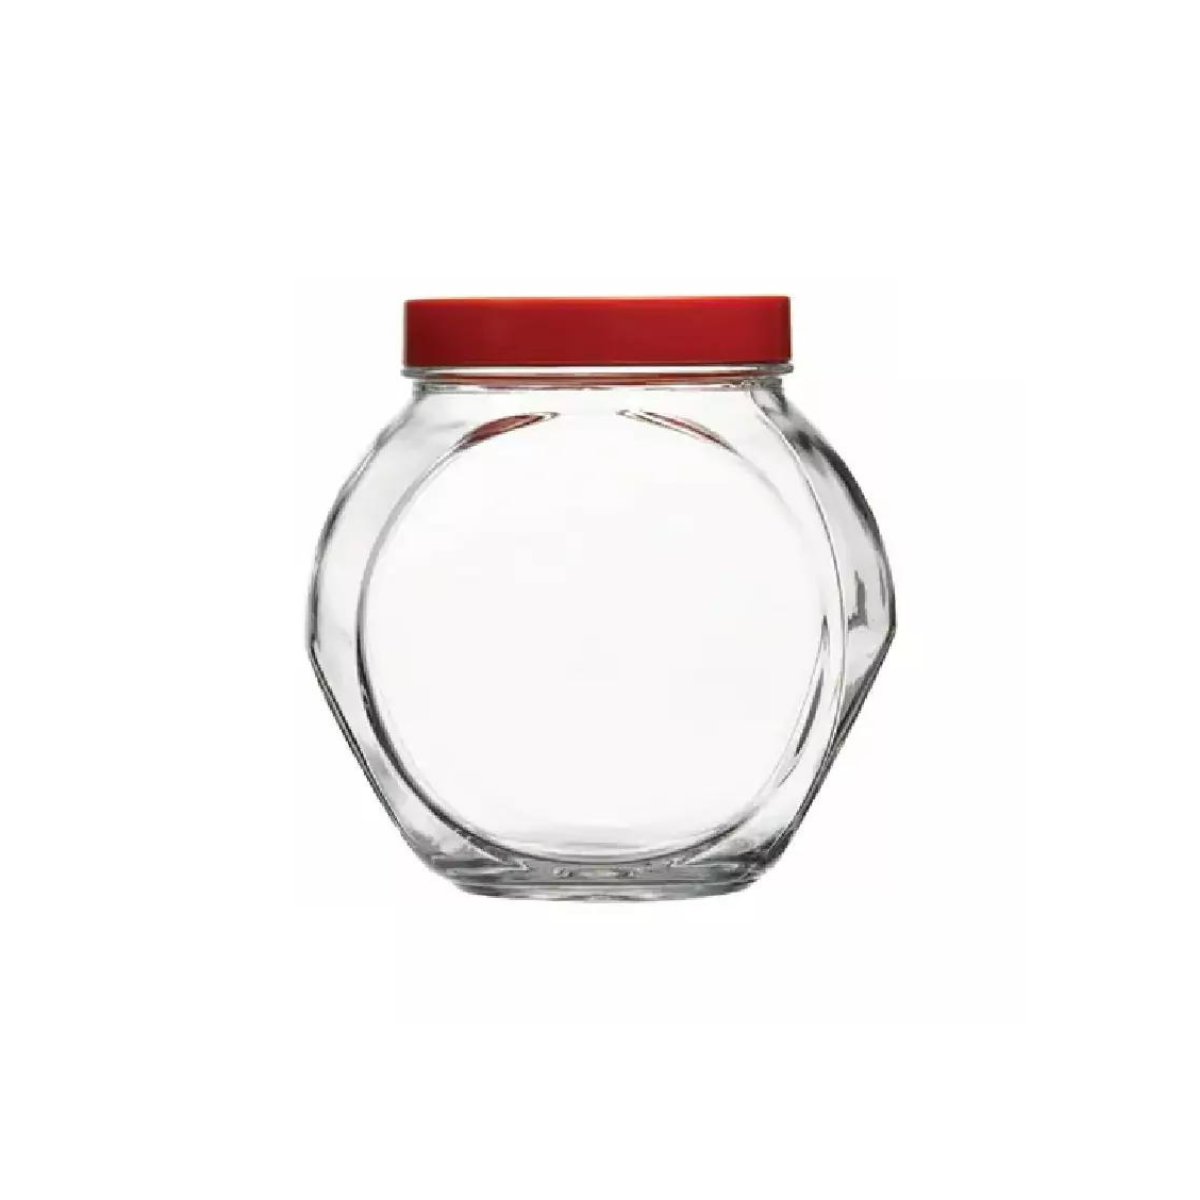 Pasabahce Bella Jar with Red Lid 1500ml - 80000